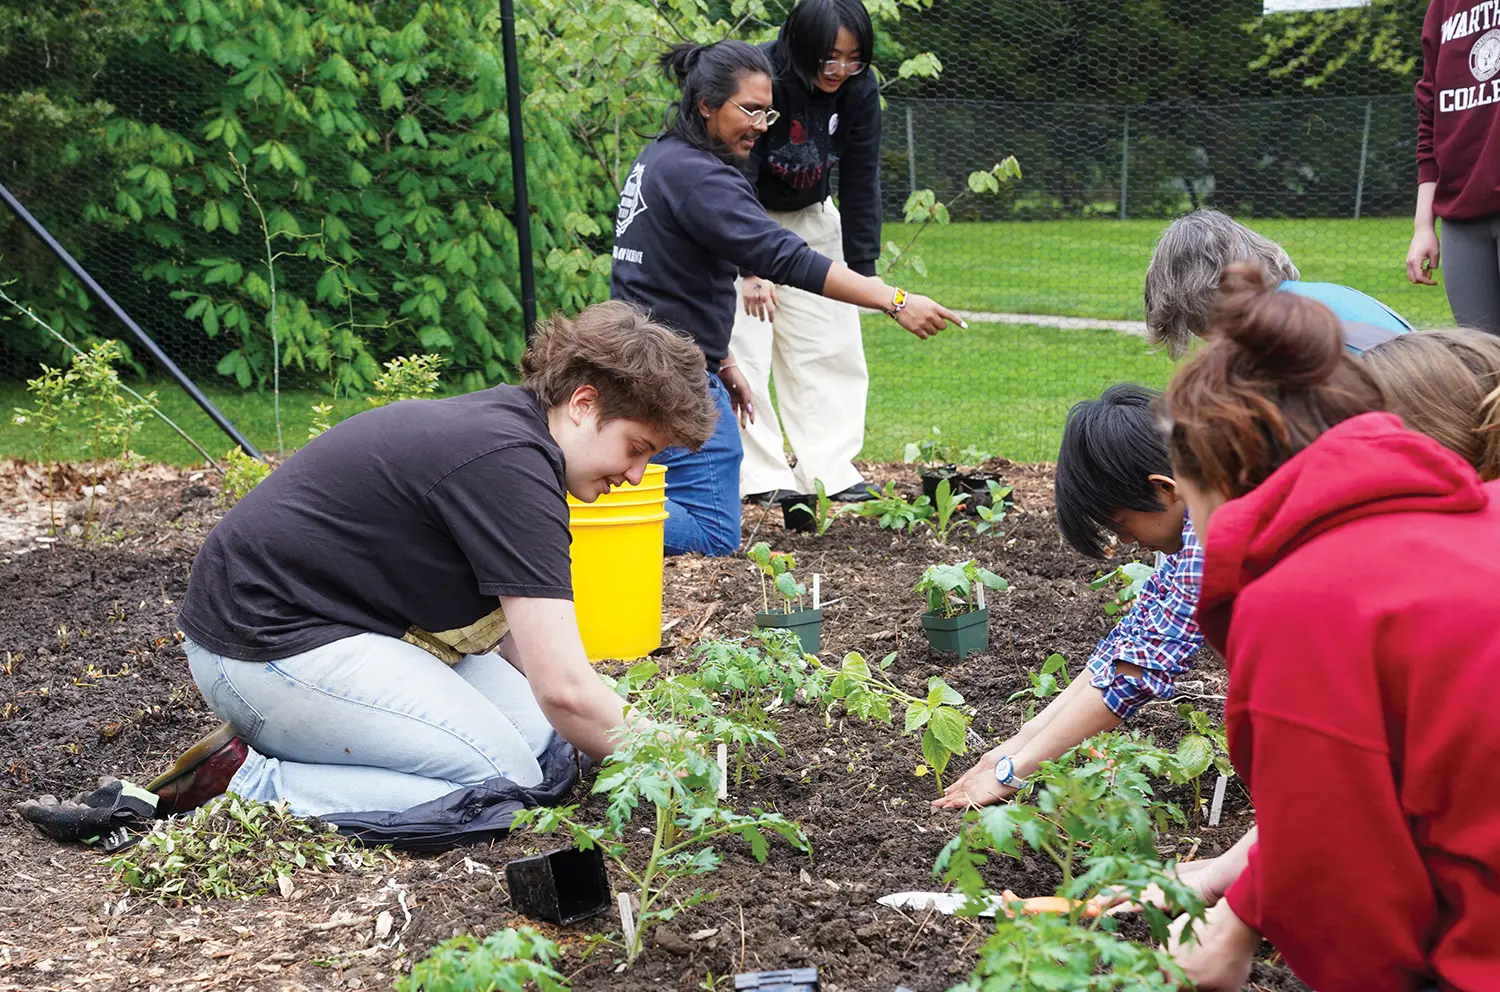 Group of Swarthmore College students planting plants in a garden